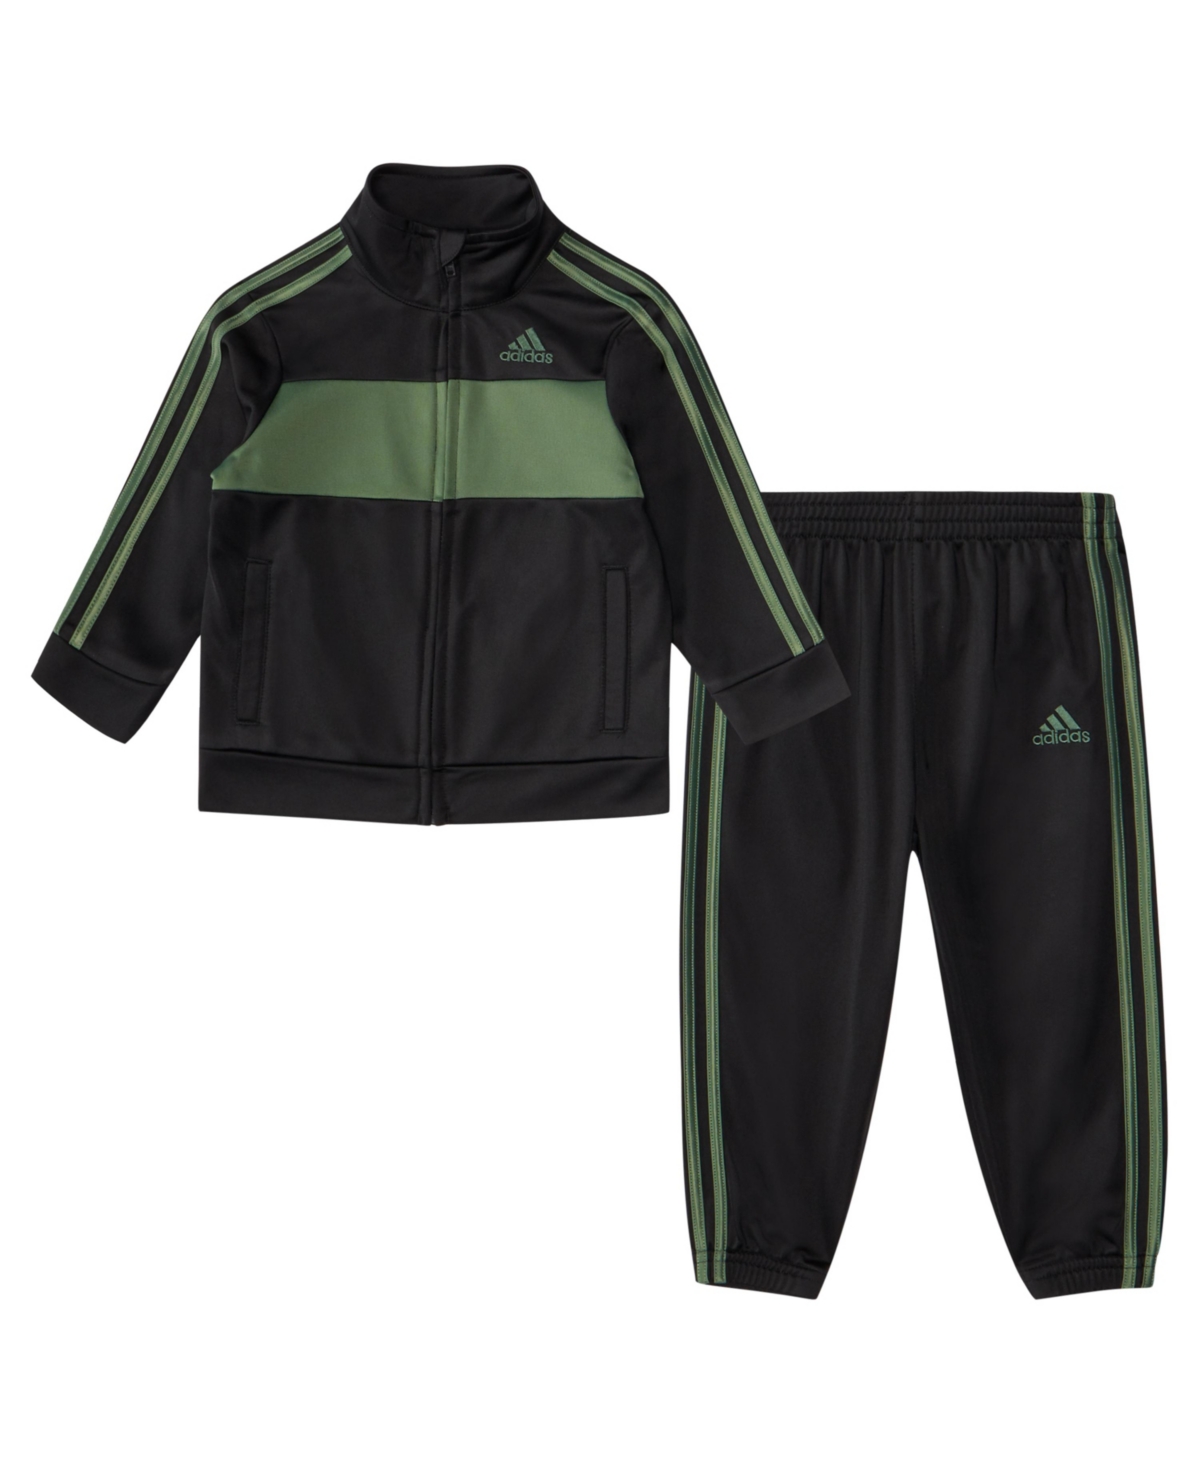 adidas Baby Boys Long Sleeve Essential Tricot Tracksuit, 2-Piece Set